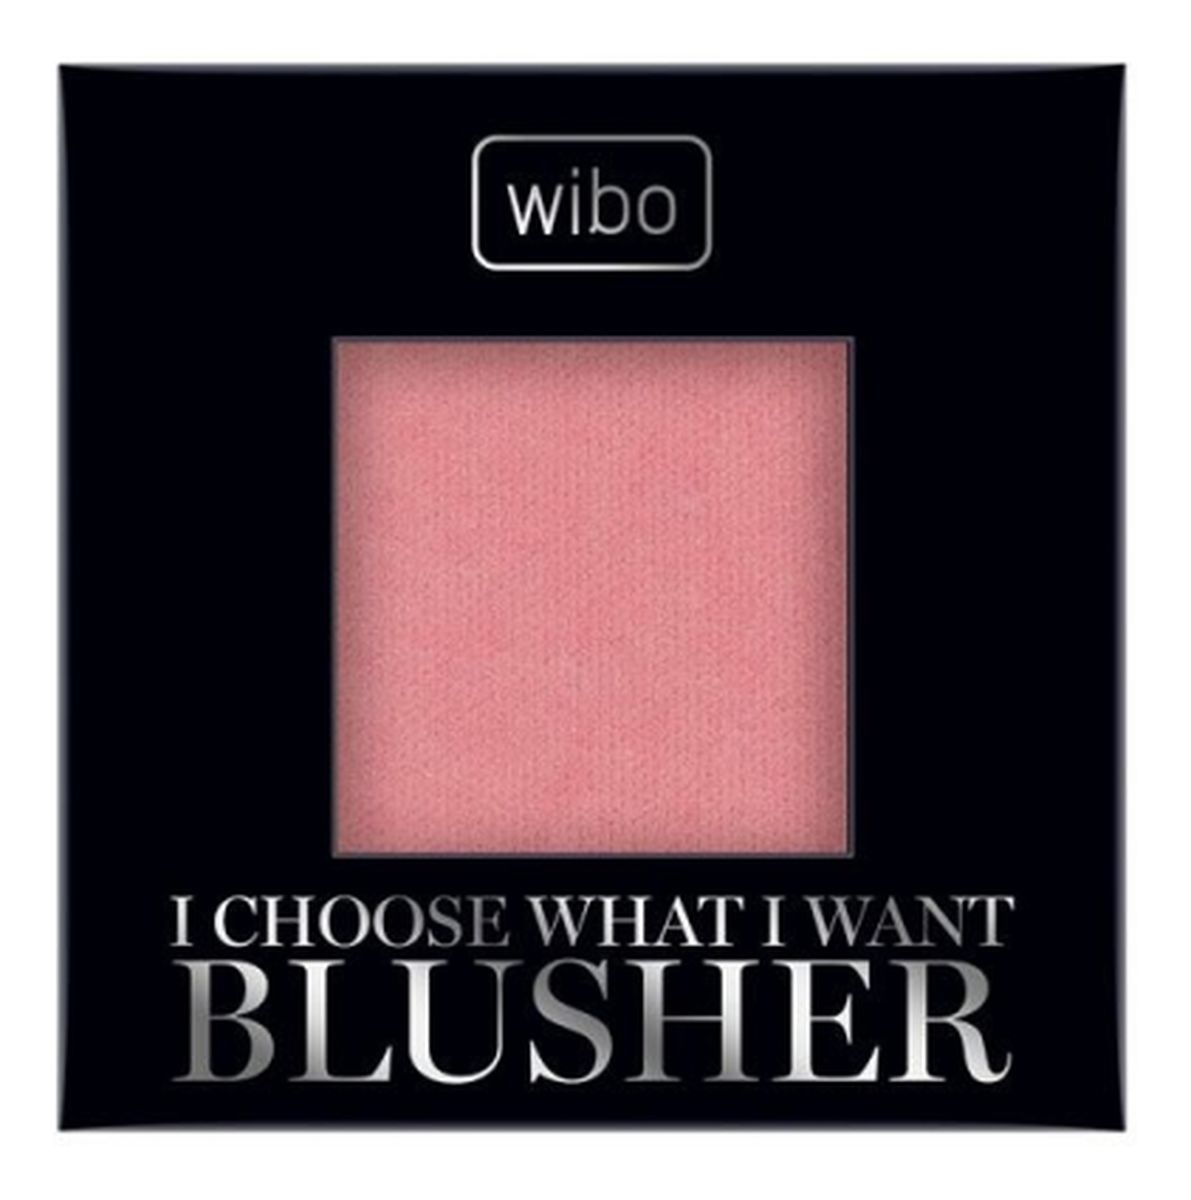 I choose what i want blusher hd rouge pudrowy róż do policzków 3 desert rose